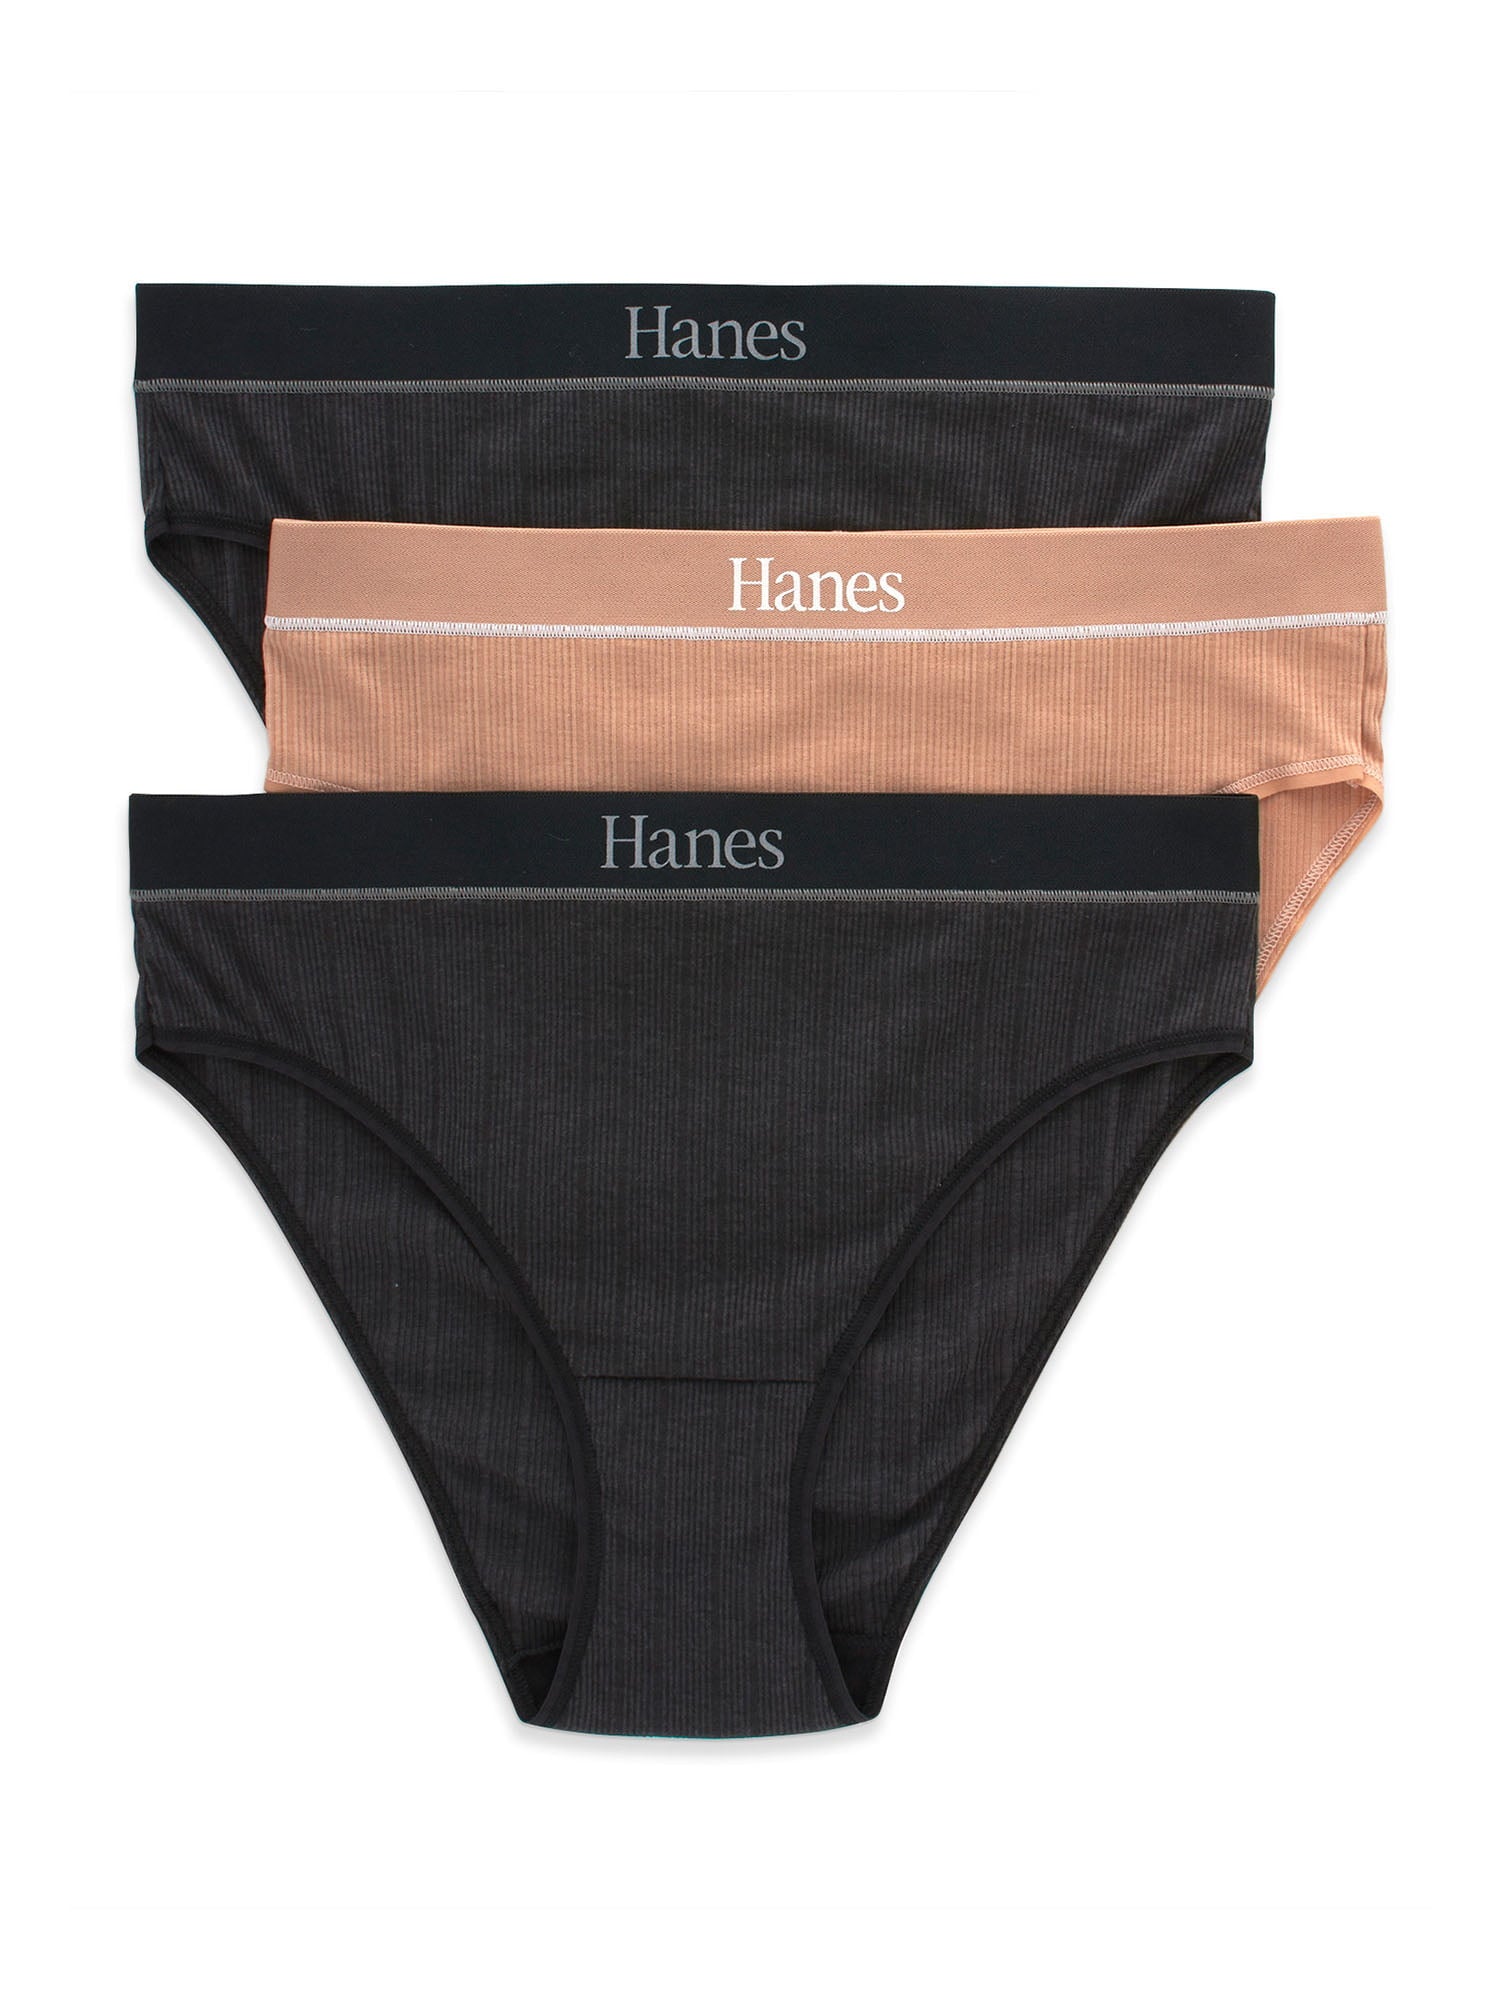 Hanes Women's Ribbed Cotton Hipster Underwear, 6-Pack